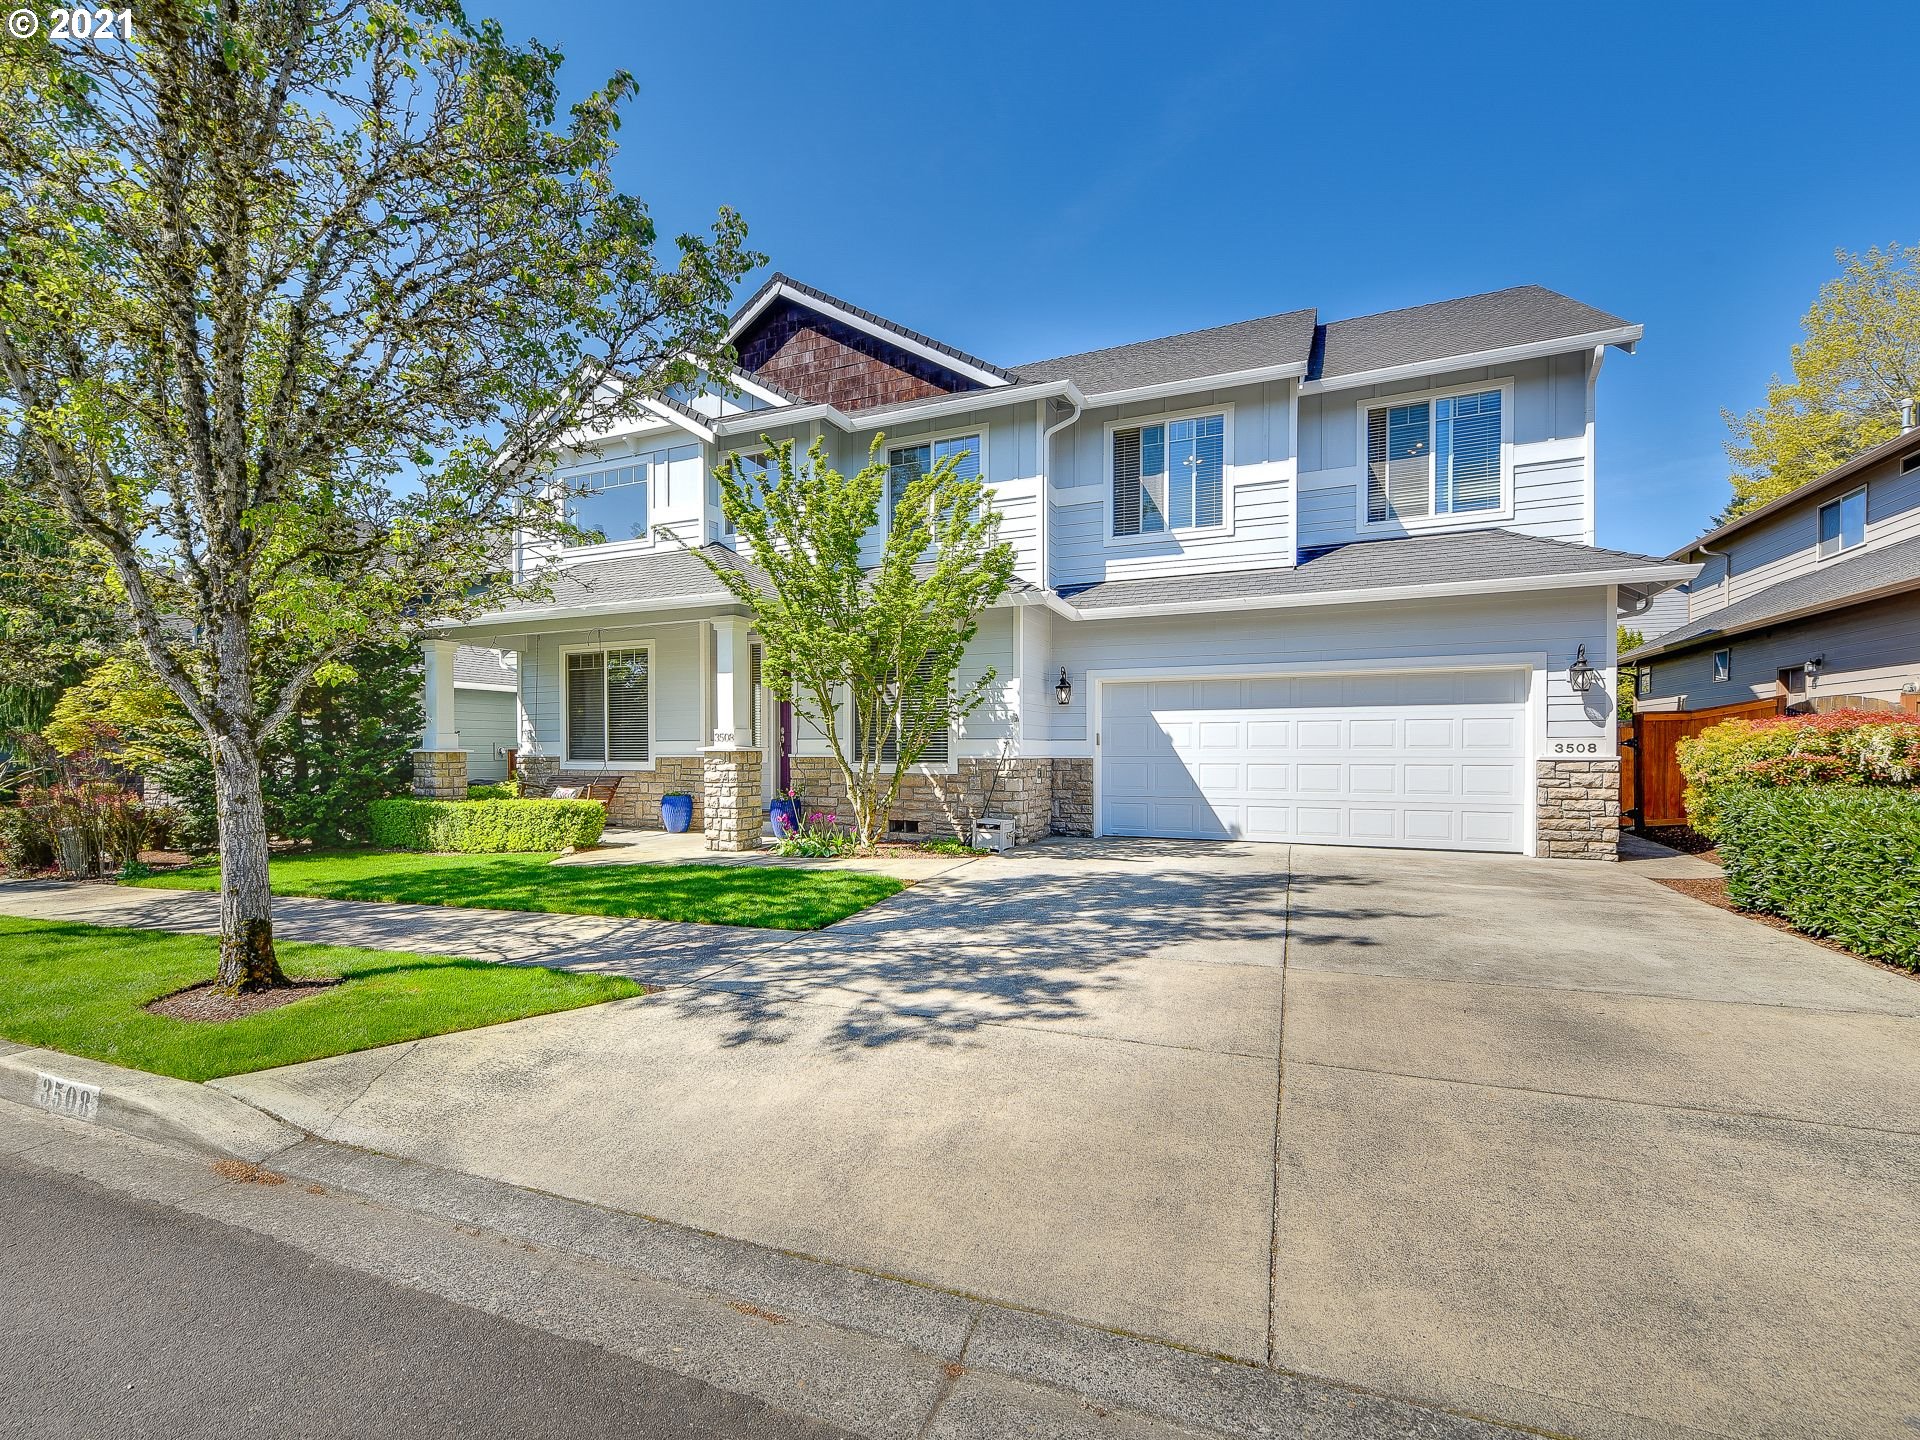 3508 SE 176TH AVE (1 of 32)